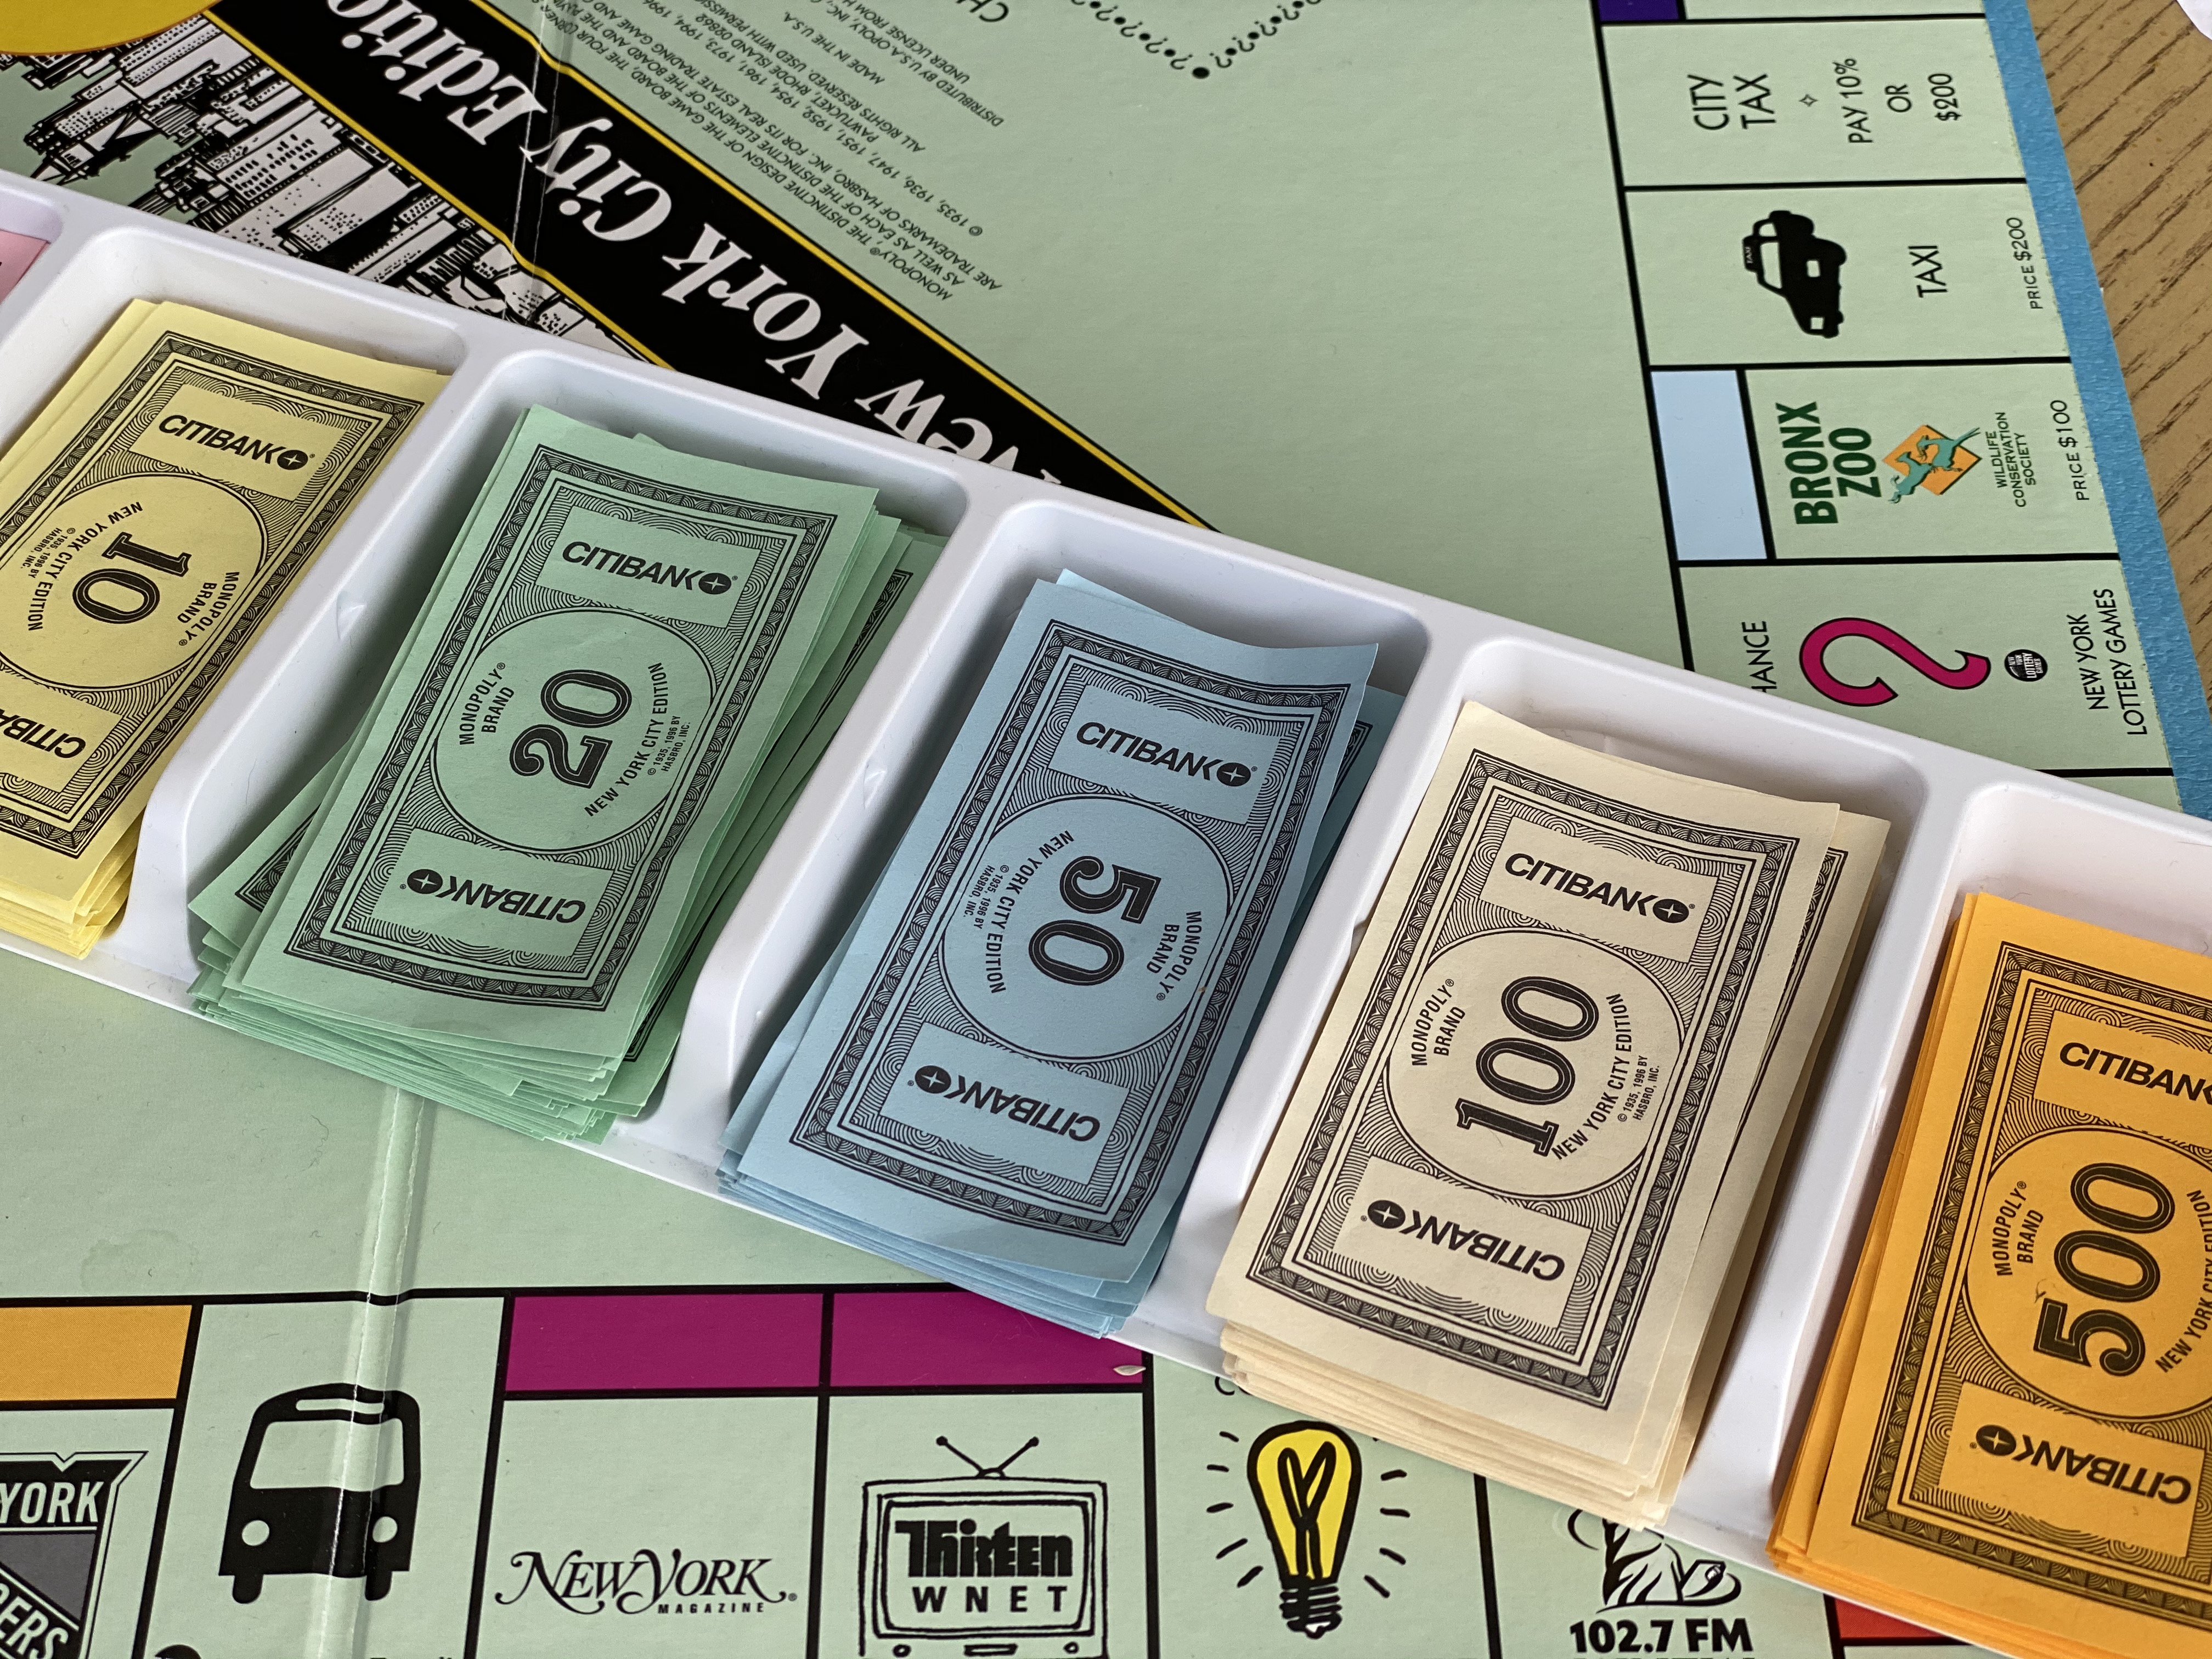 A New York Real Estate edition of the Monopoly board game